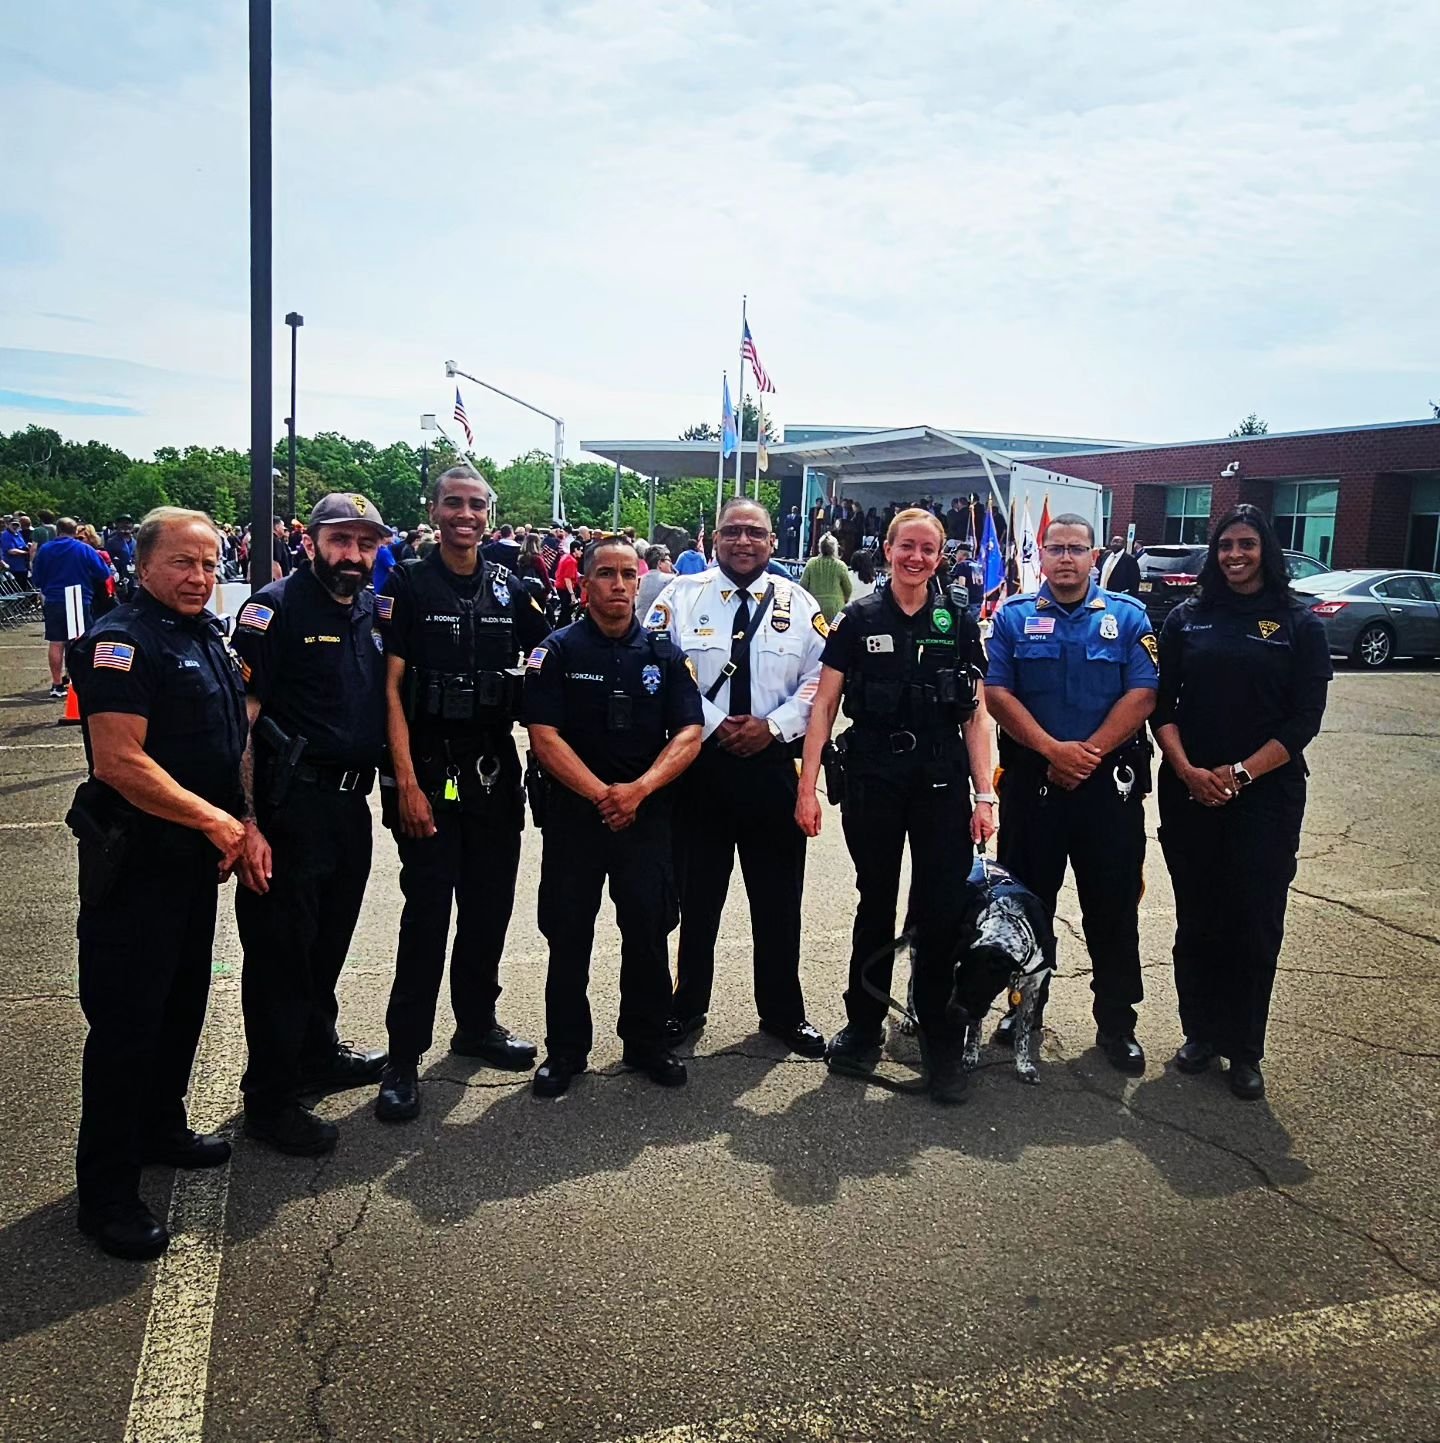 🌟 Members of the Haledon Police Department, including K-9 Nash, were honored to attend the Passaic County Vietnam Veterans Memorial Wall Dedication Opening Ceremony. We were also joined by Mayor Michael Johnson, Council President Mohammad Ramadan, a